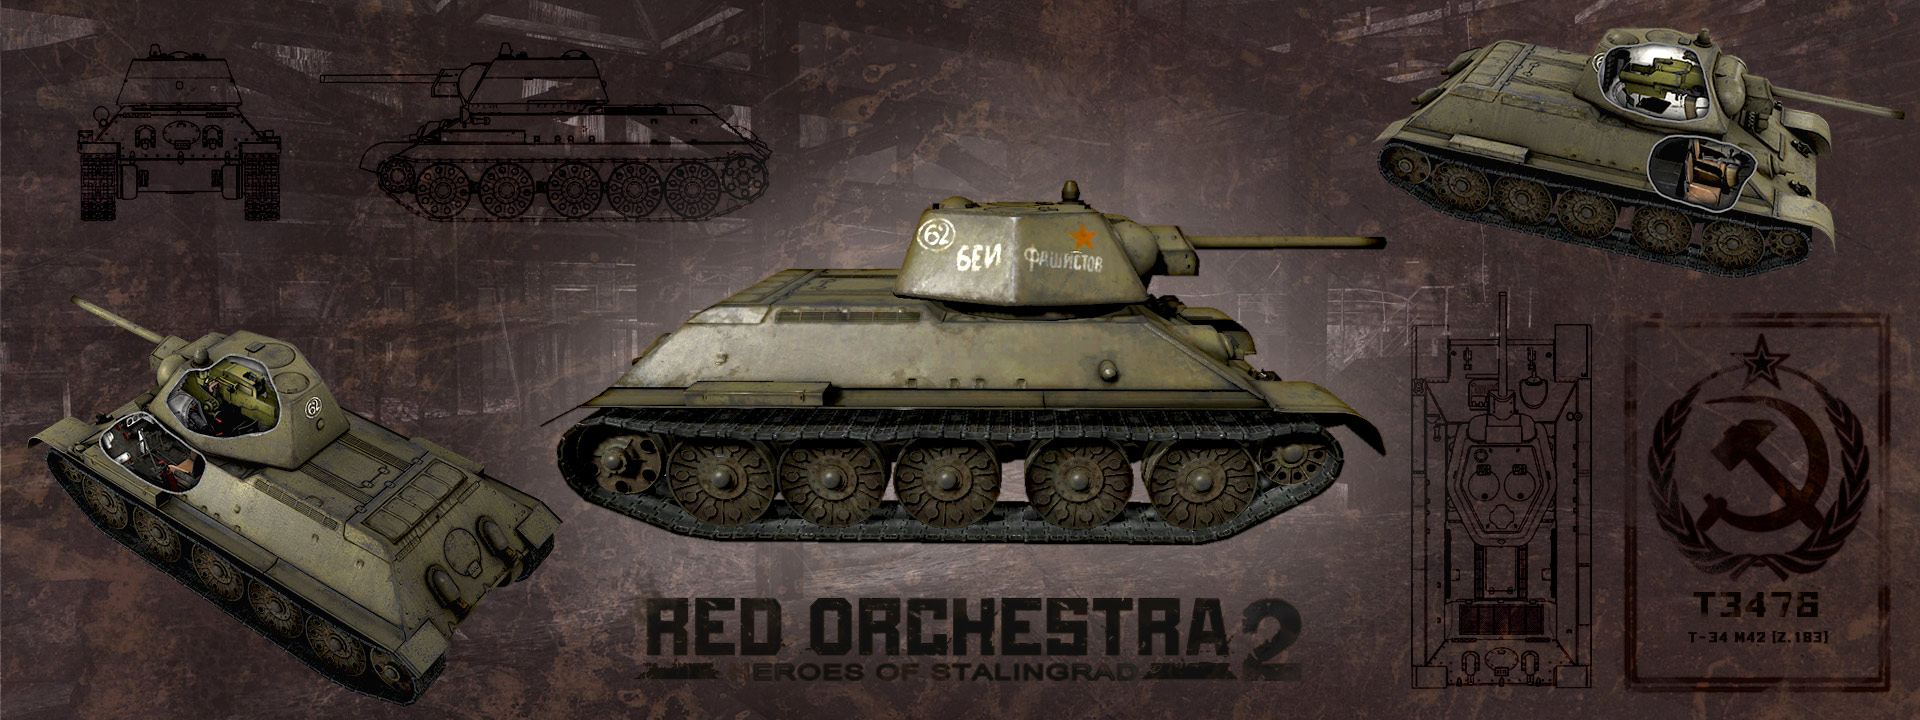 red orchestra 2 rising storm tanks